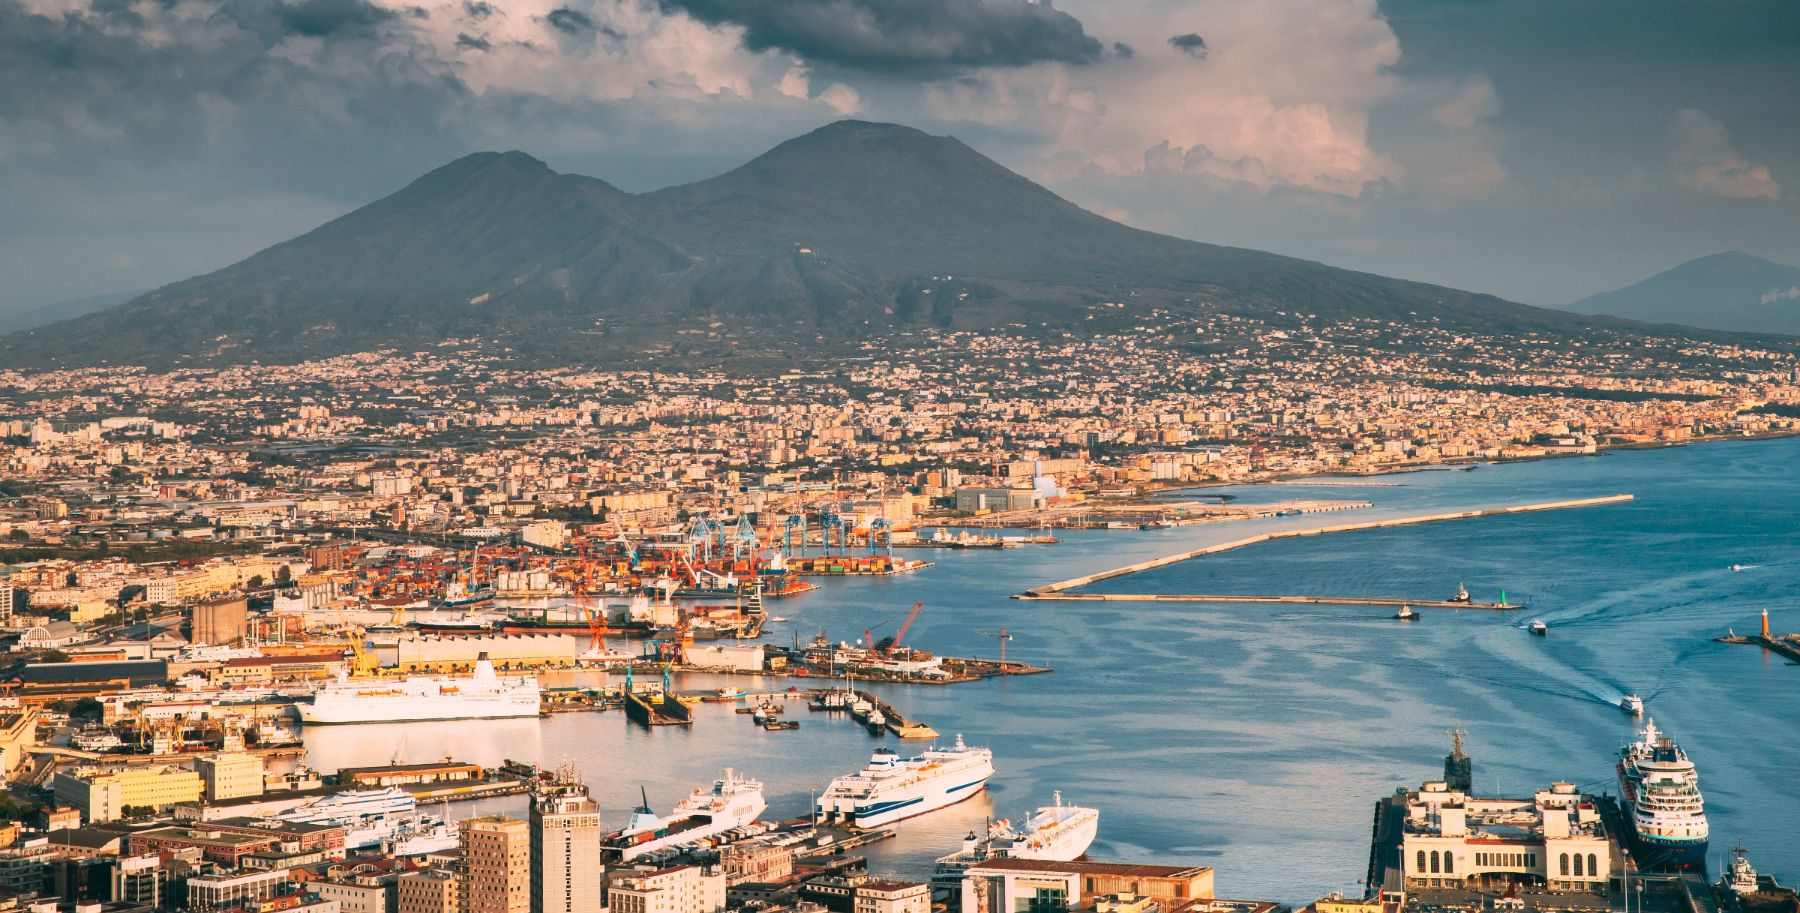 The panoramic view of Naples, one of the most beautiful cities in Italy, should not be missed.